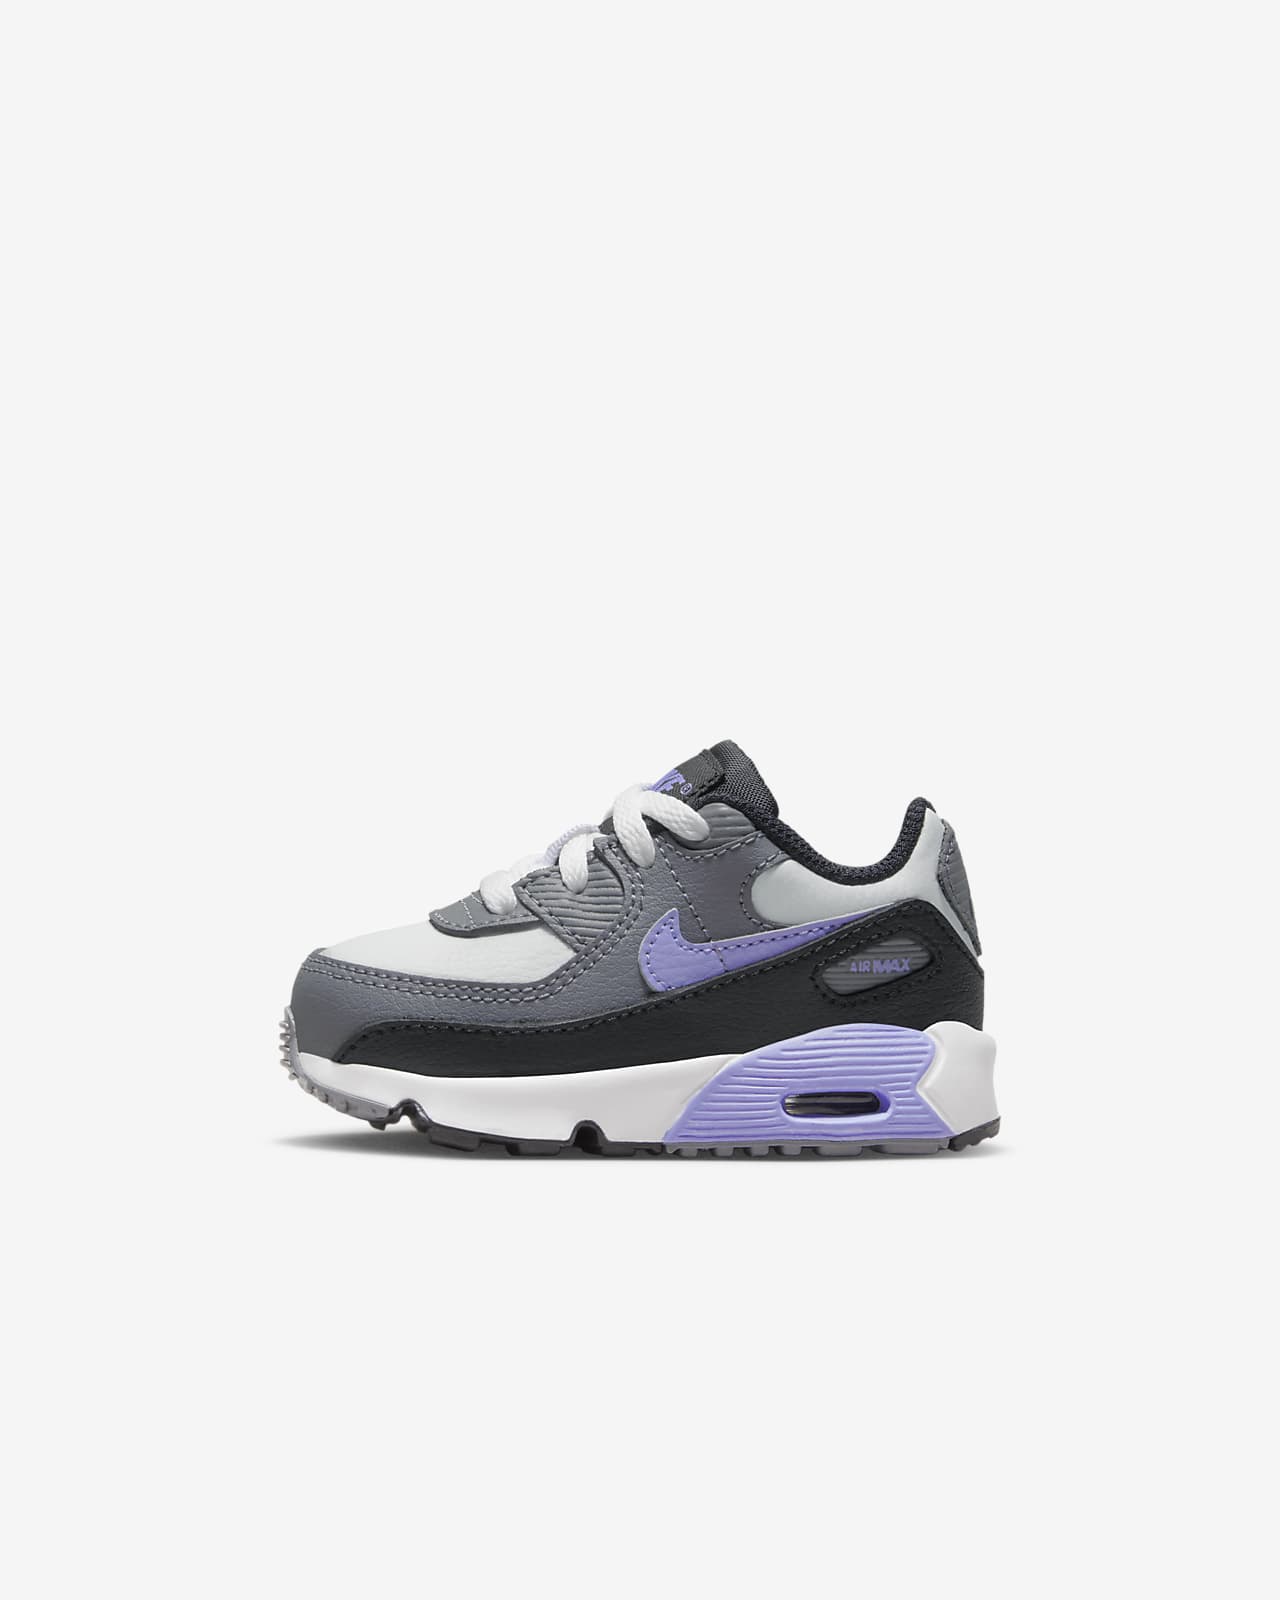 Nike Air Max 90 LTR Baby/Toddler Shoes.